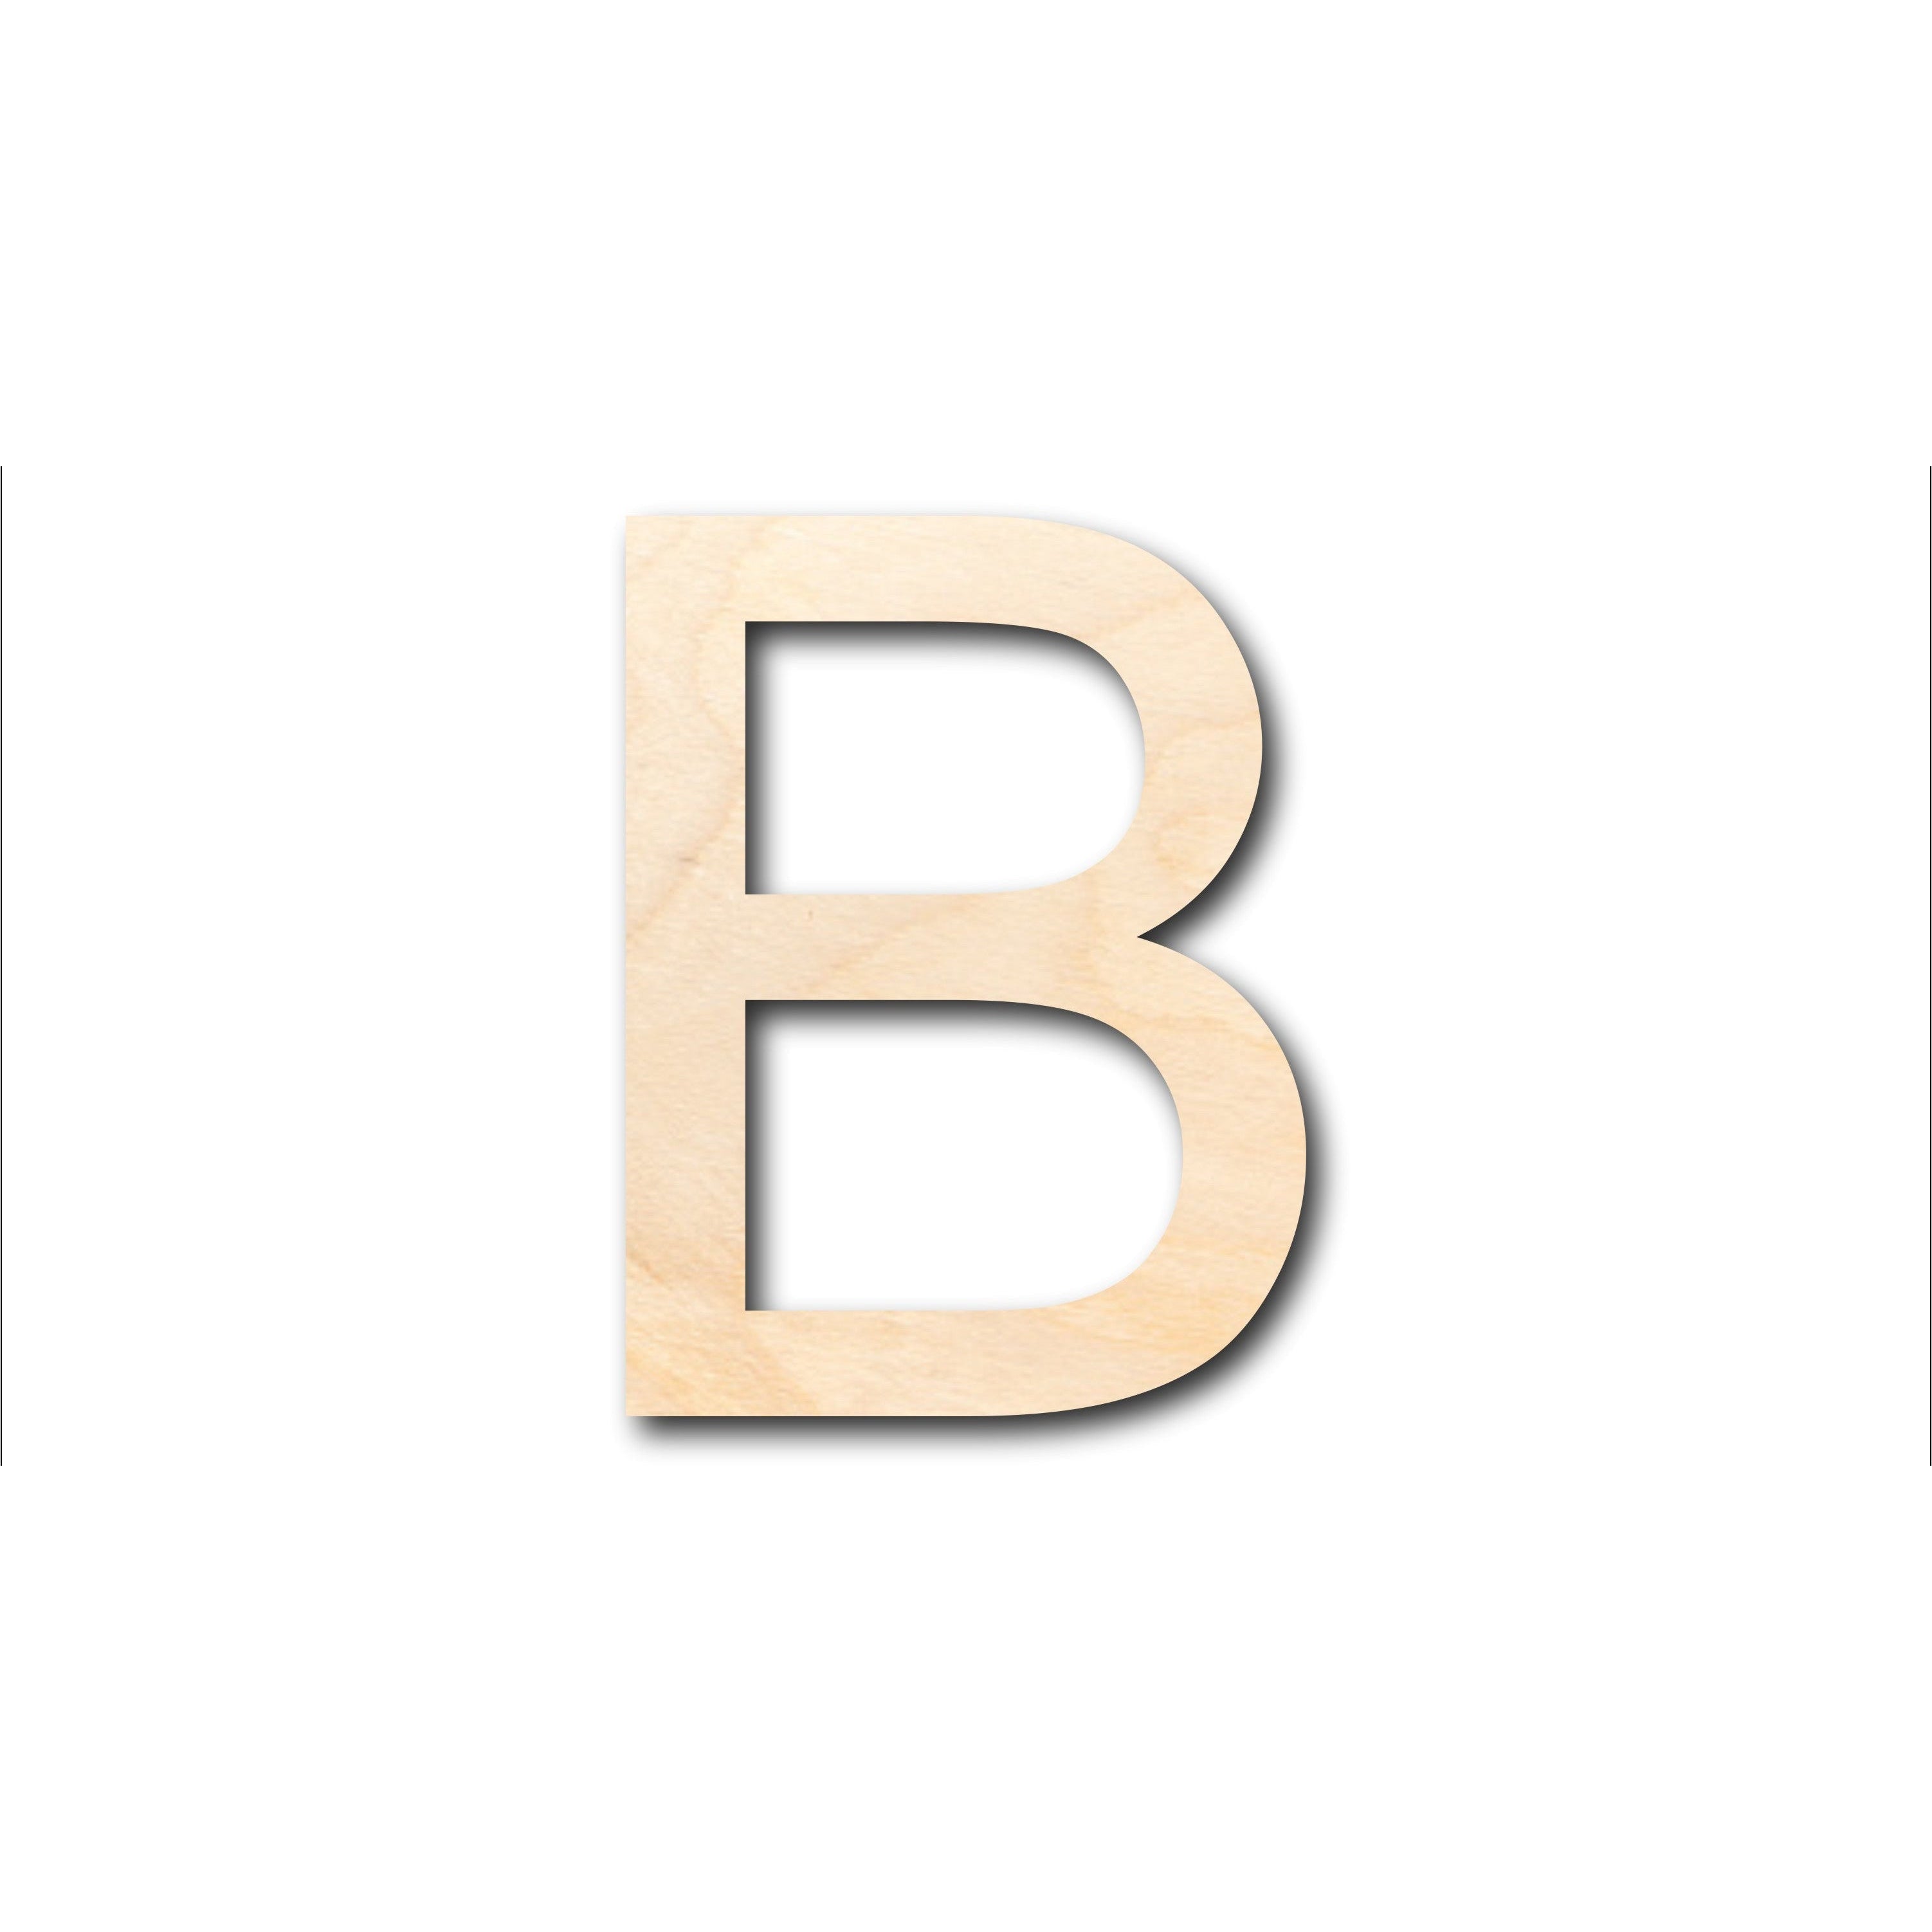 Unfinished Wood Arial Letter B Shape - Craft - up to 36